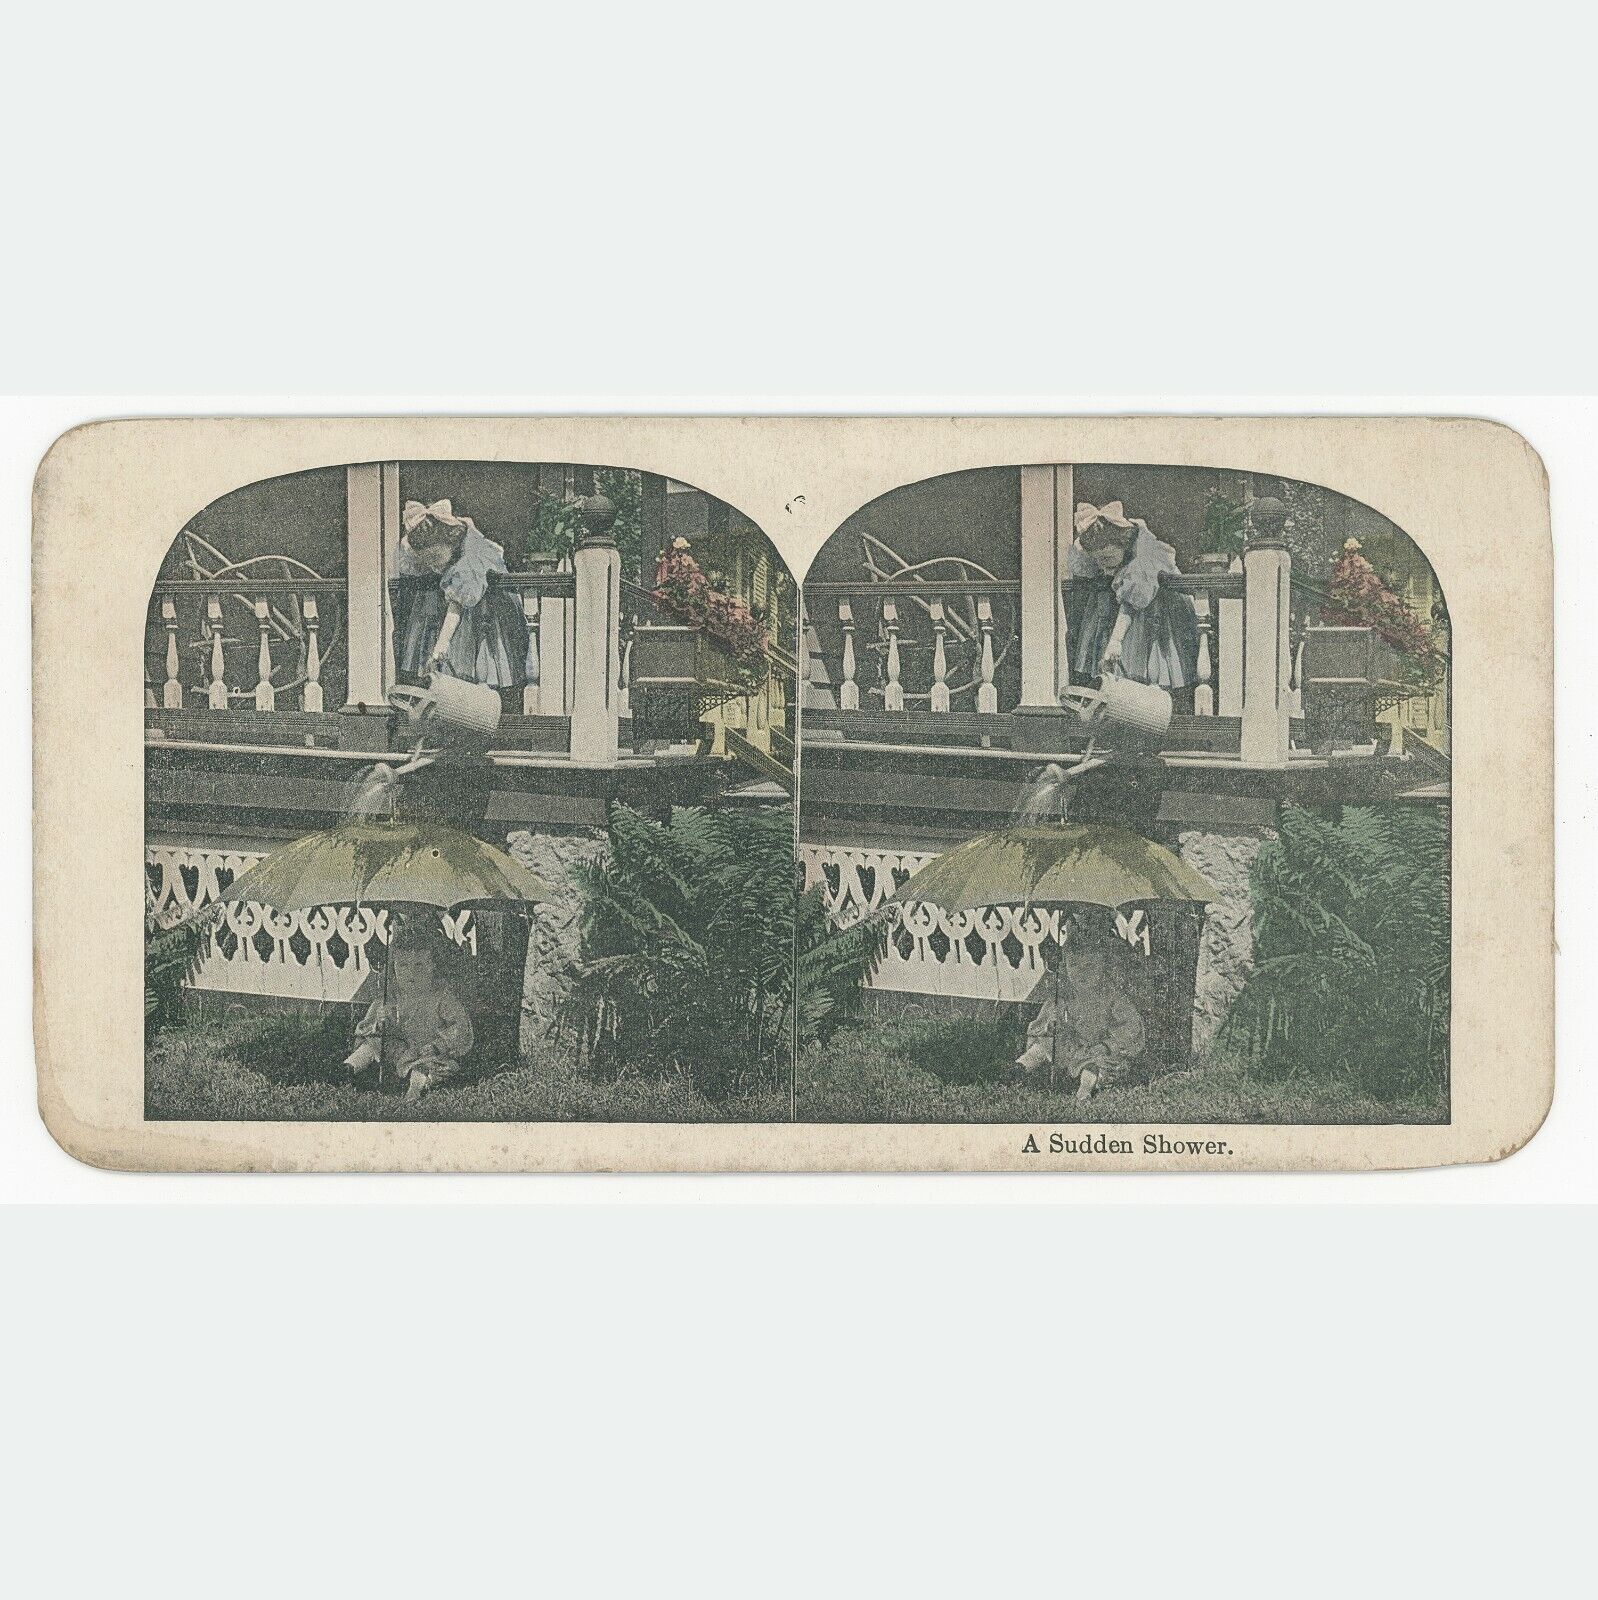  Stereoscope Stereo View A Sudden Shower Children Playing